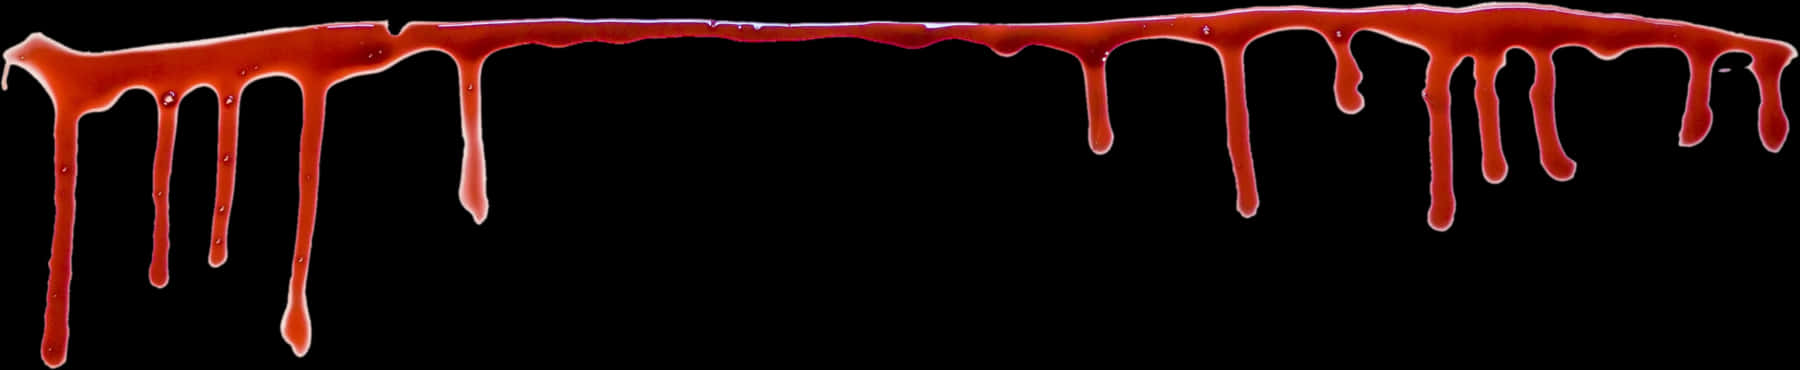 Dripping Blood Splatter Texture PNG image